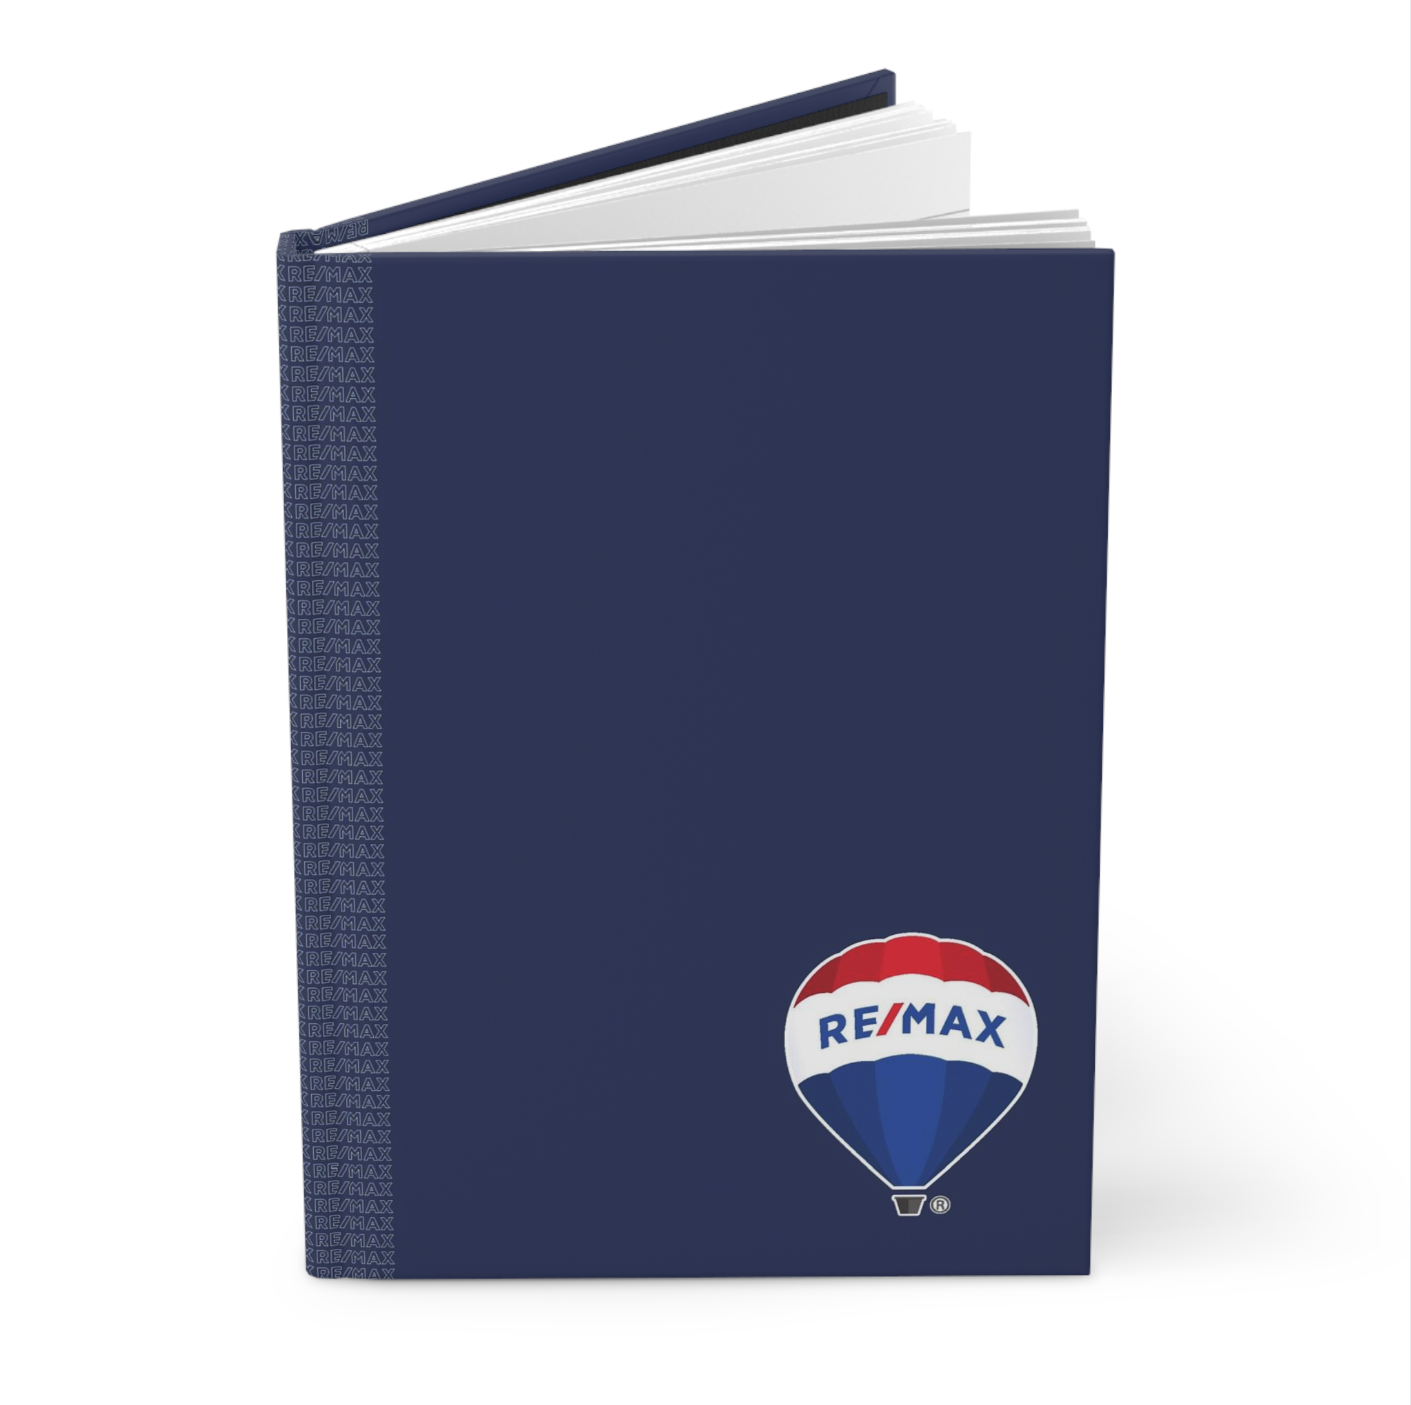 RE/MAX Full Color Hardcover Binders Blue Monogram (from as low as $10.46 per cover)